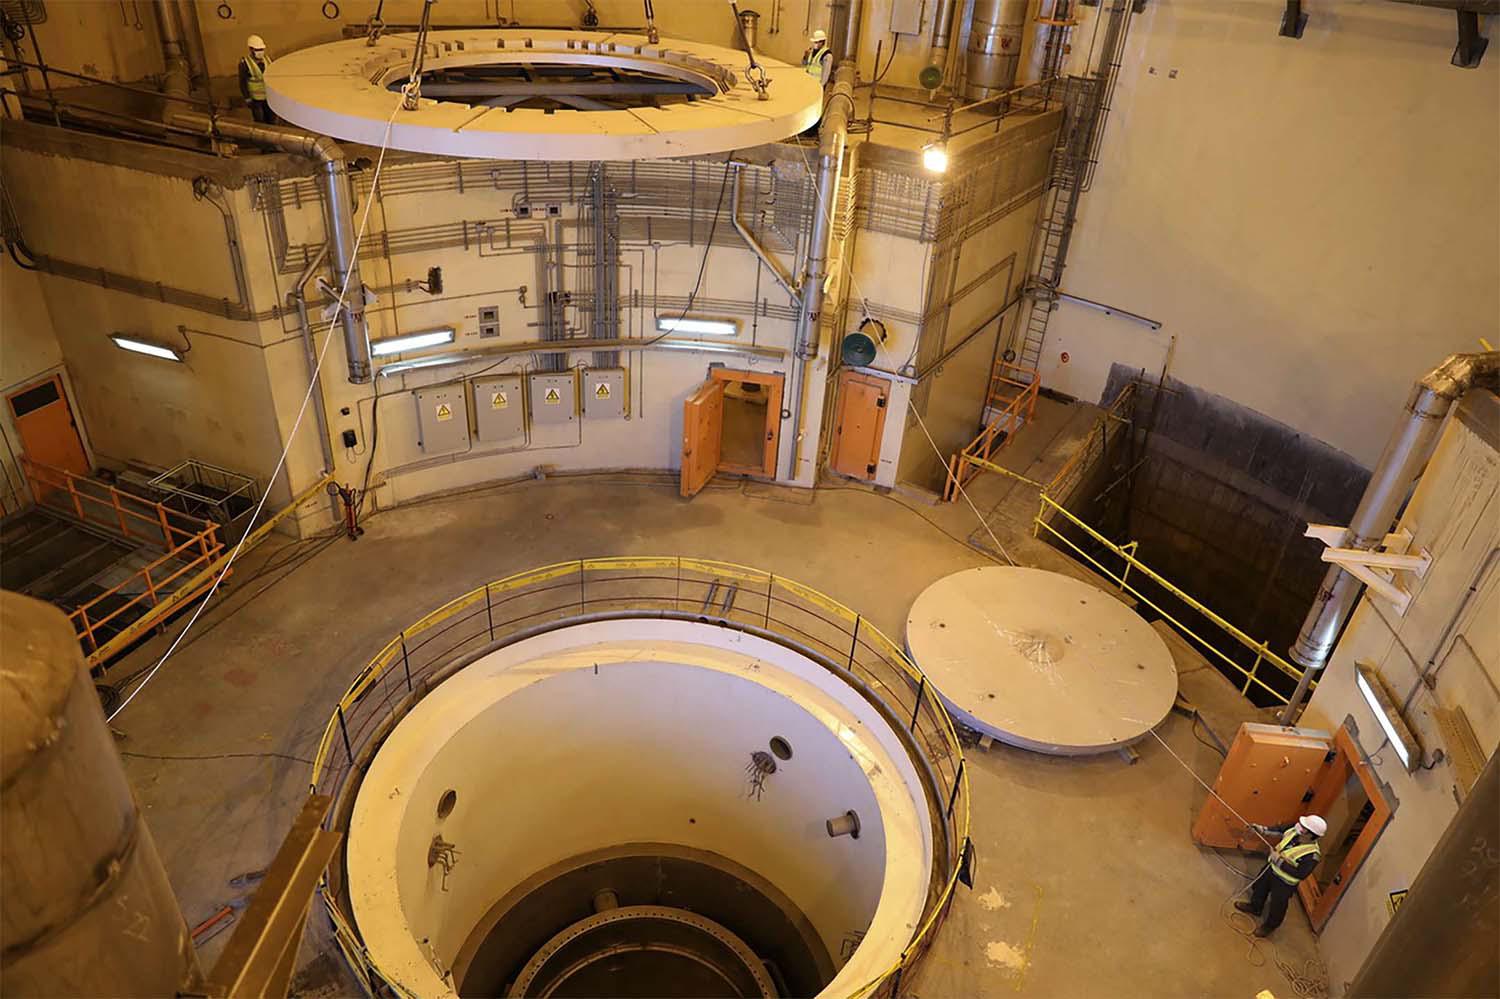 The move applied to Iran's Arak heavy water research reactor